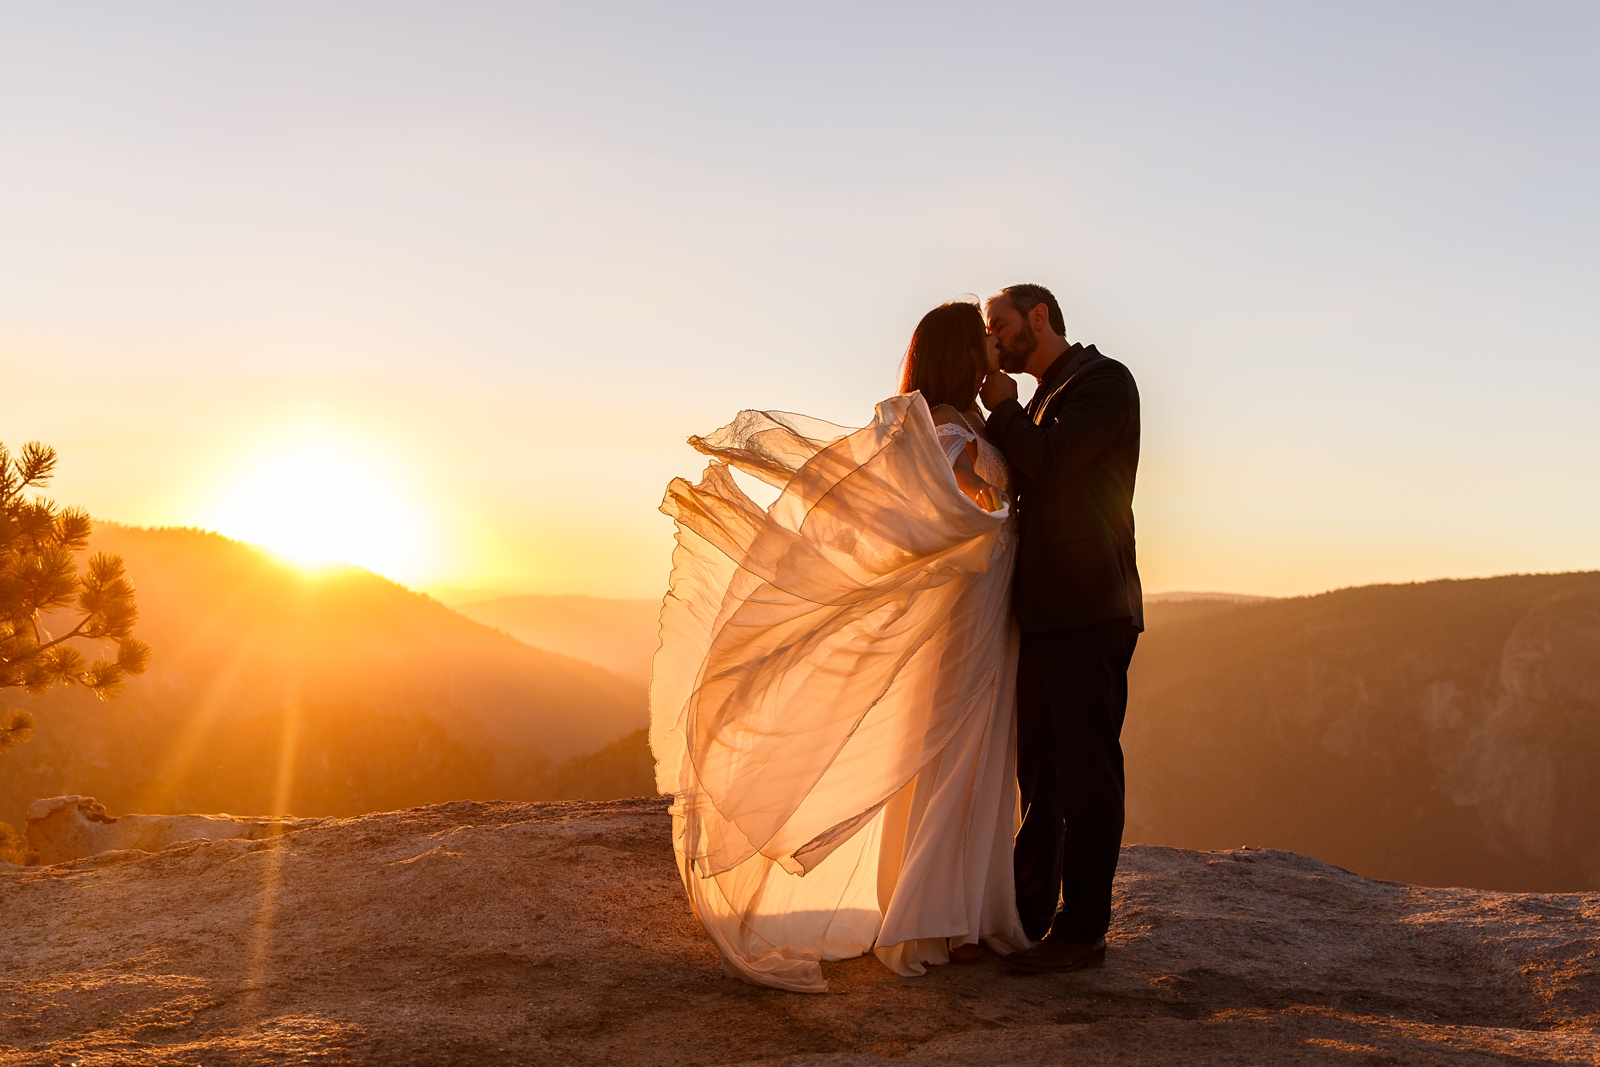 Fairytale like kiss at this bride and groom's Yosemite sunset elopement.